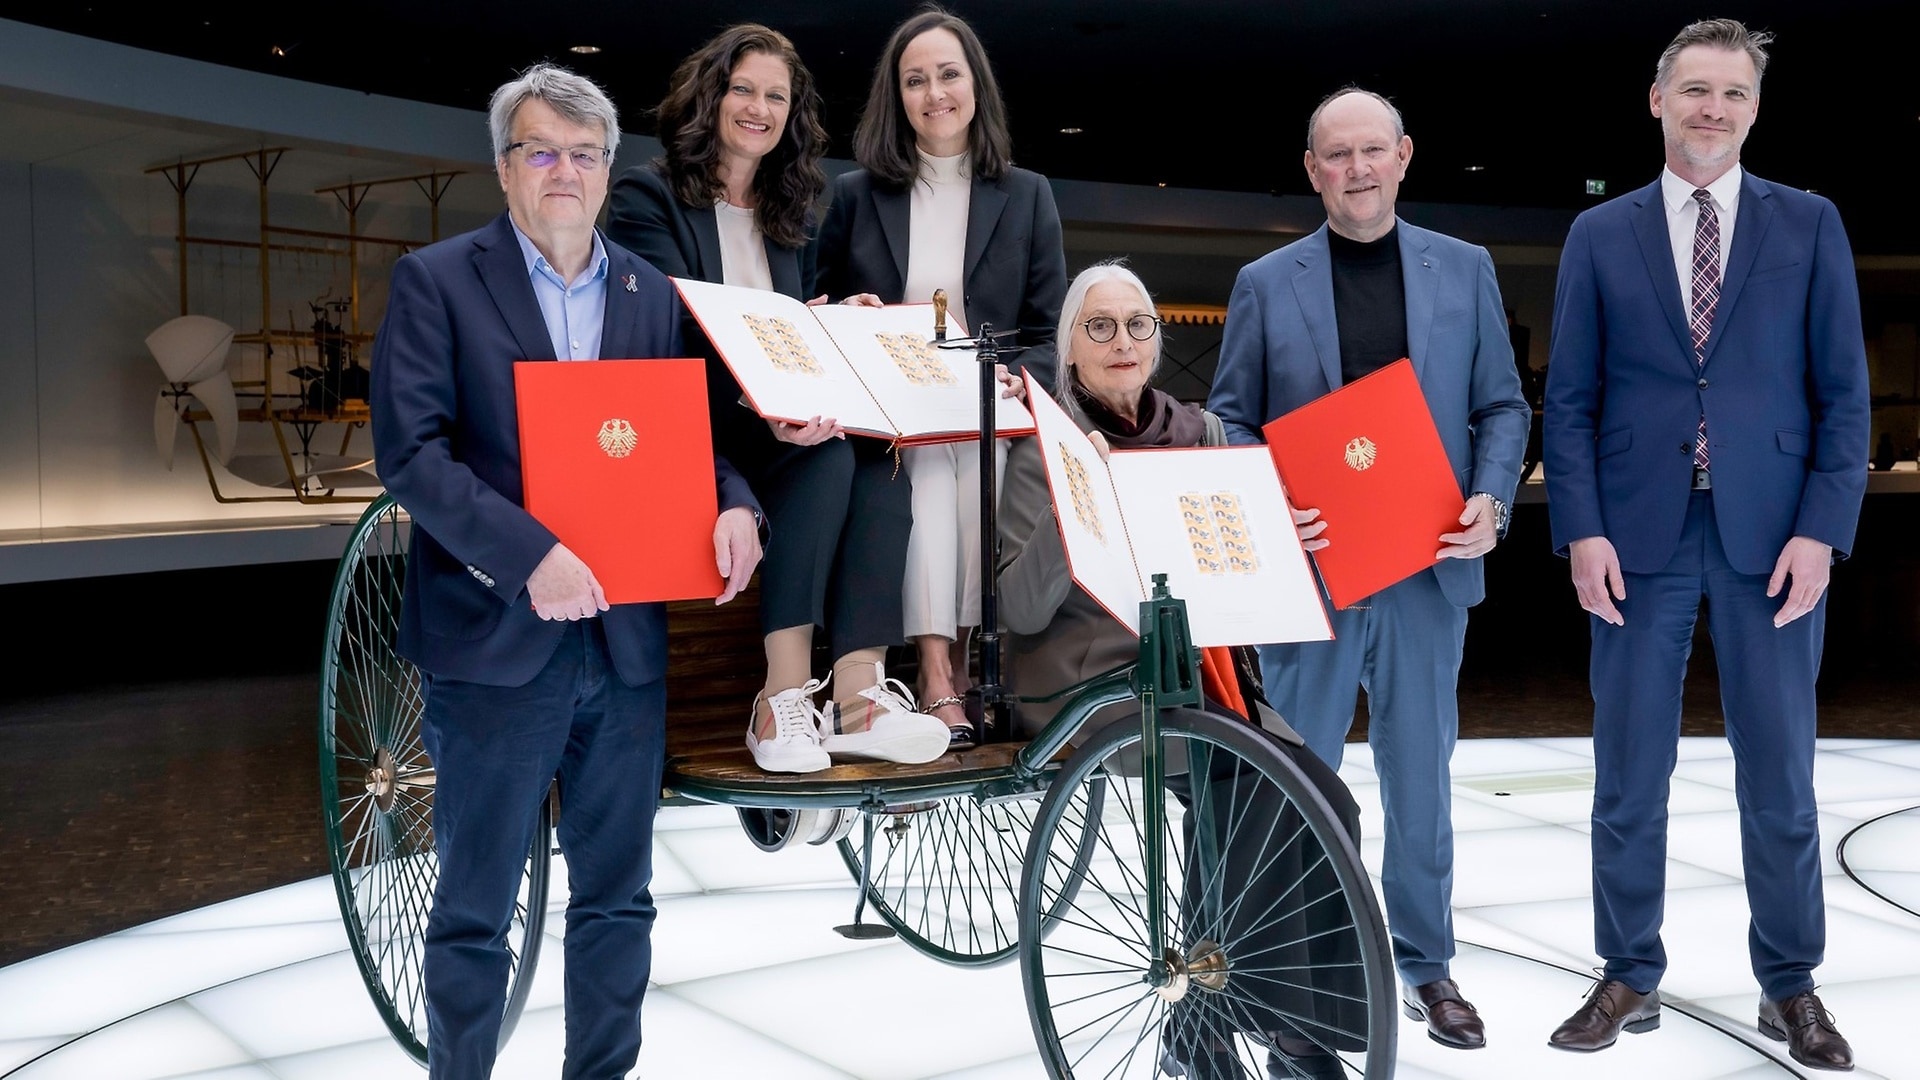 Handover of scrapbooks from Fabian Leber (spokesman for the Federal Minister of Finance) to Marcus Breitschwerdt (head of Mercedes-Benz Heritage GmbH), Jutta Benz (great-granddaughter of Bertha and Carl Benz), Bettina Haussmann (director of Mercedes-Benz Museum), Alexandra Süß (head of Mercedes-Benz Classic Archive and collection) and Reinhard Houben (member of the German Bundestag and member of the program advisory board for special postage stamps).